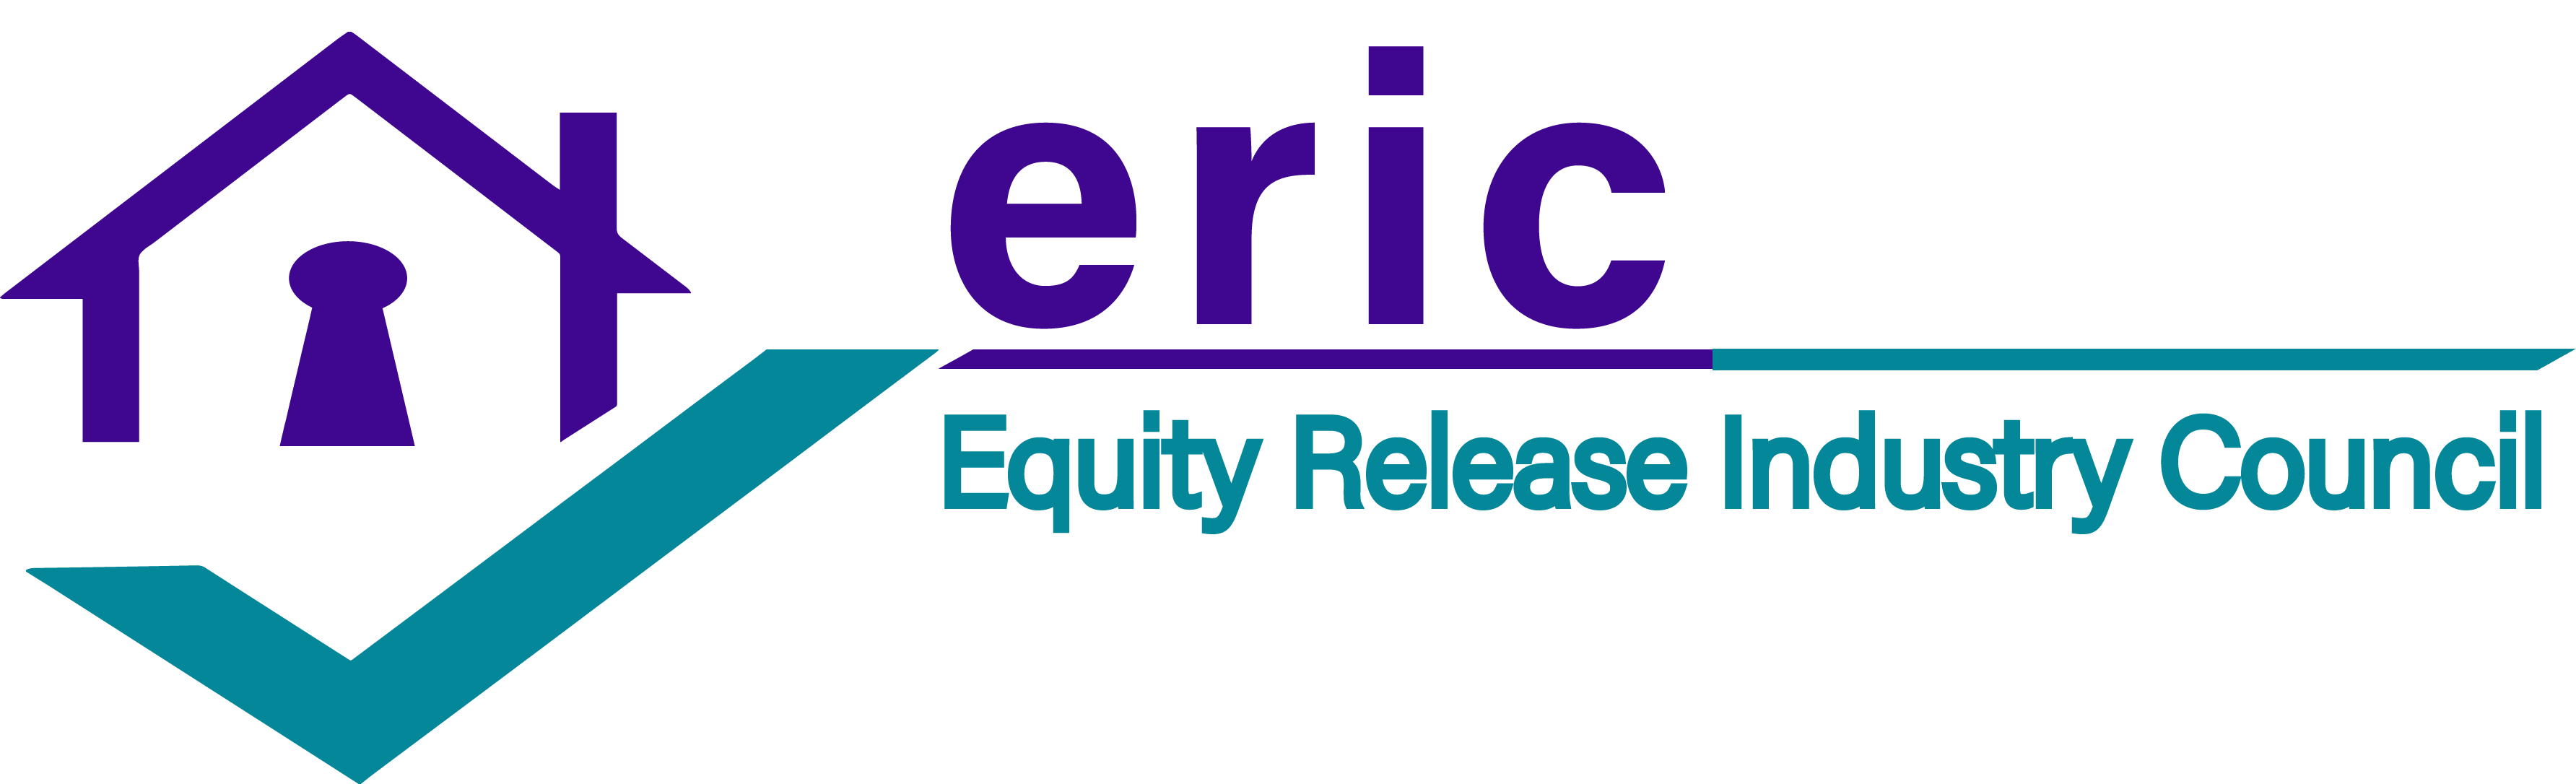 Equity Release Industry Council